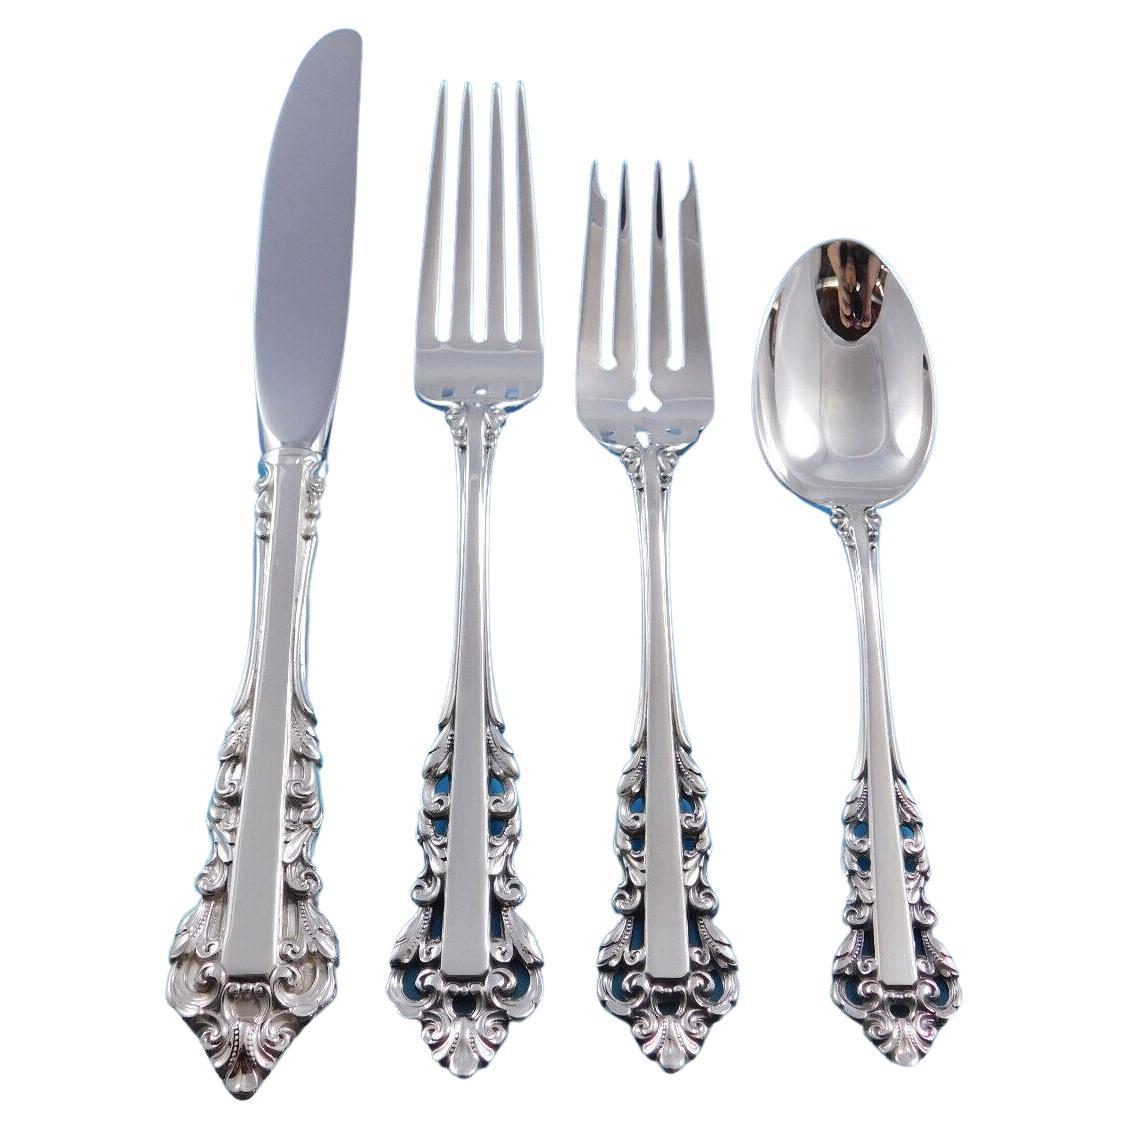 Medici by Gorham (1971) Sterling Silver Flatware Set for 8 Service 32 pieces